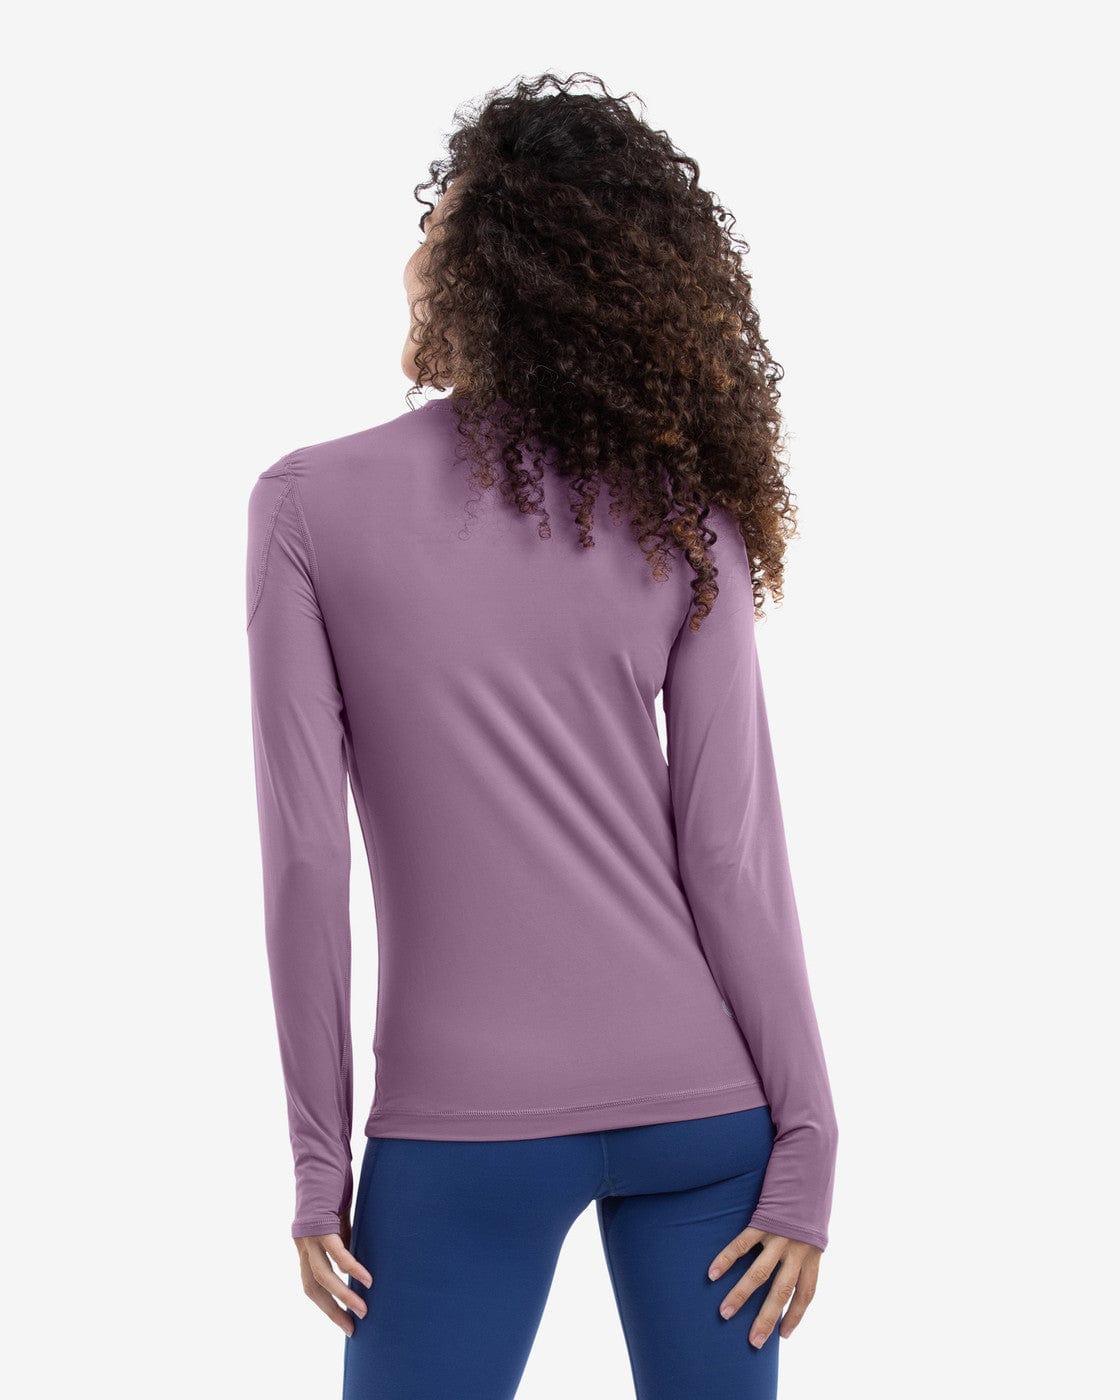 BloqUV Sunshirt BloqUV - Women's Long Sleeve 24/7 equestrian team apparel online tack store mobile tack store custom farm apparel custom show stable clothing equestrian lifestyle horse show clothing riding clothes horses equestrian tack store